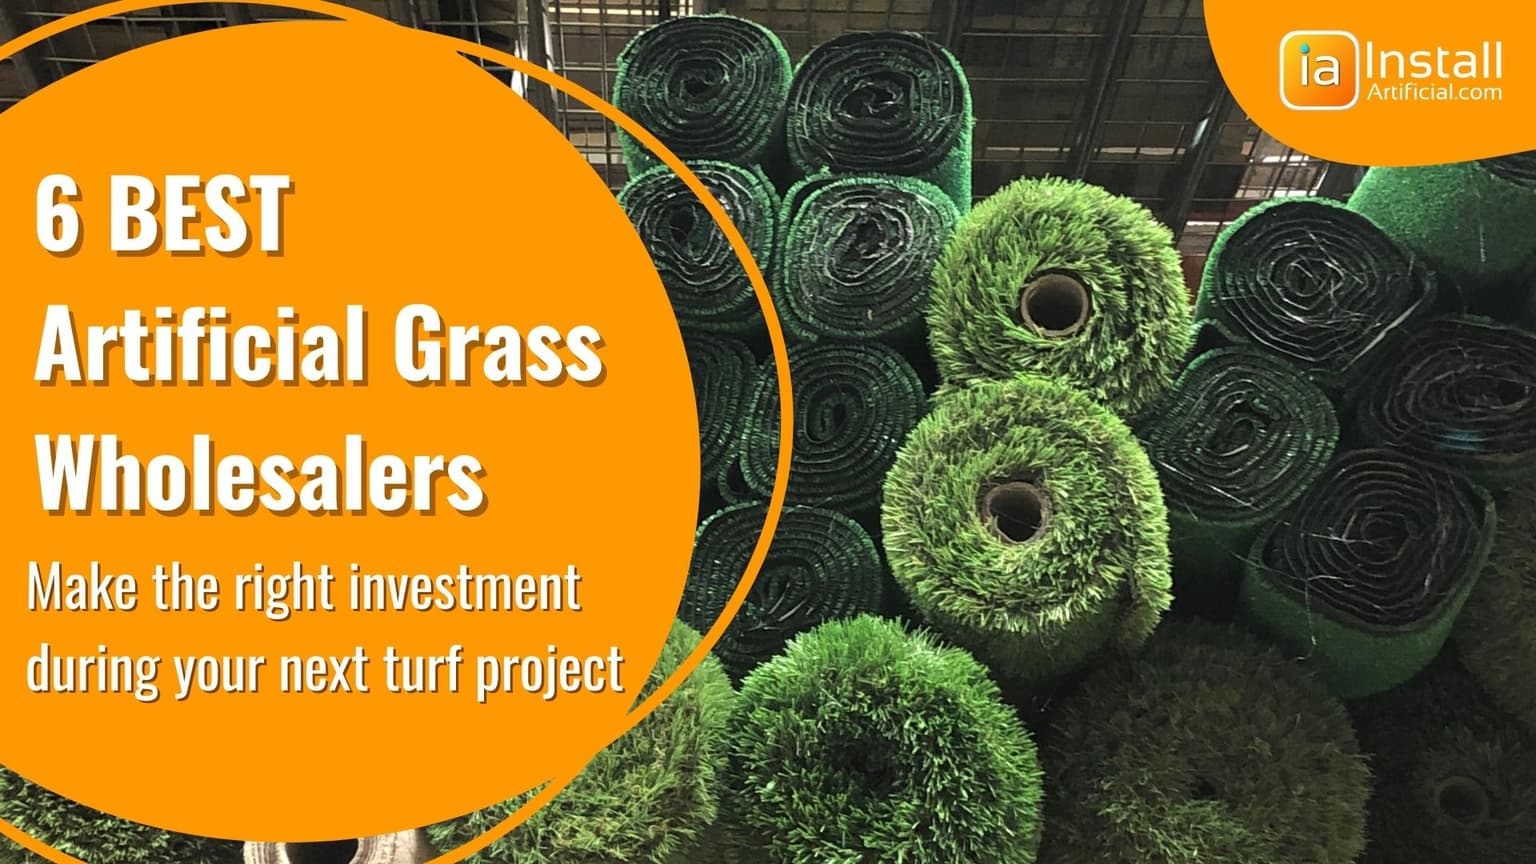 6 Best Artificial Grass Wholesalers in the US